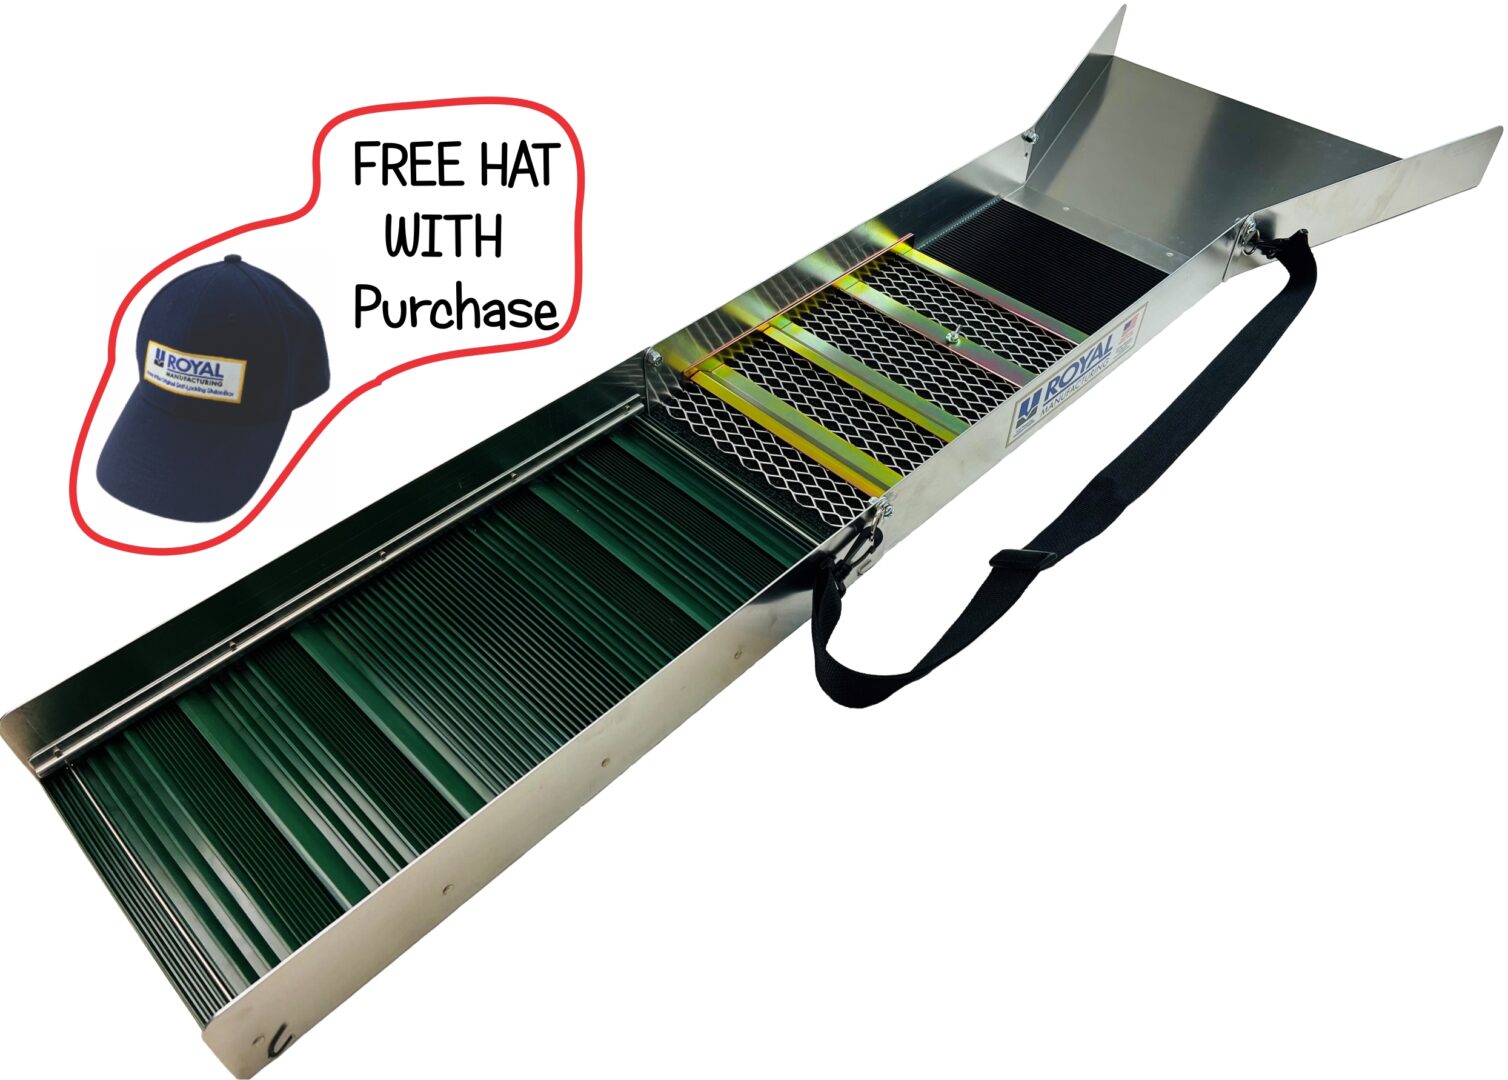 A green Sluice Box 10-inch Folding Hybrid with a free hat with purchases.